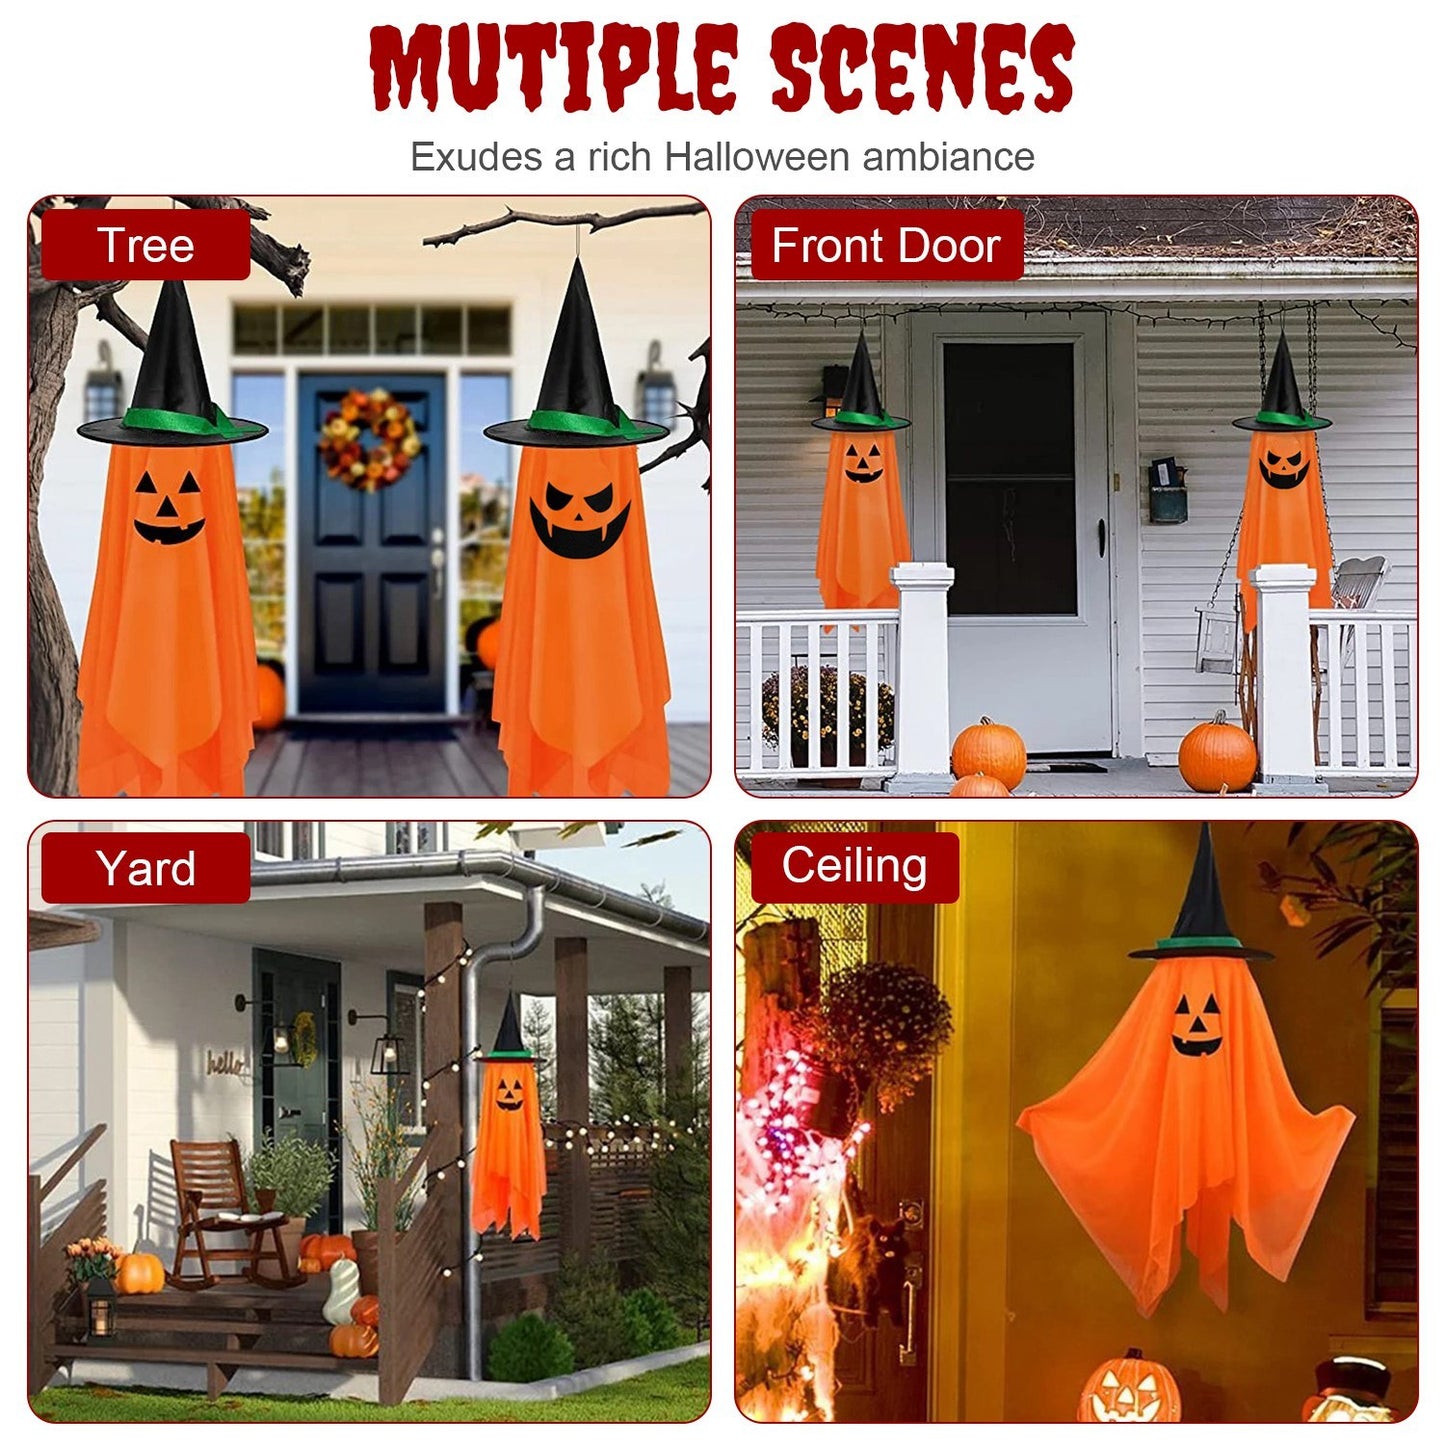 2 Pack Hanging Ghosts with Wizard Hat Snicker Scary Face Halloween Party Hanging Decorations Pumpkin Wizard Hat for Eave Tree Porch